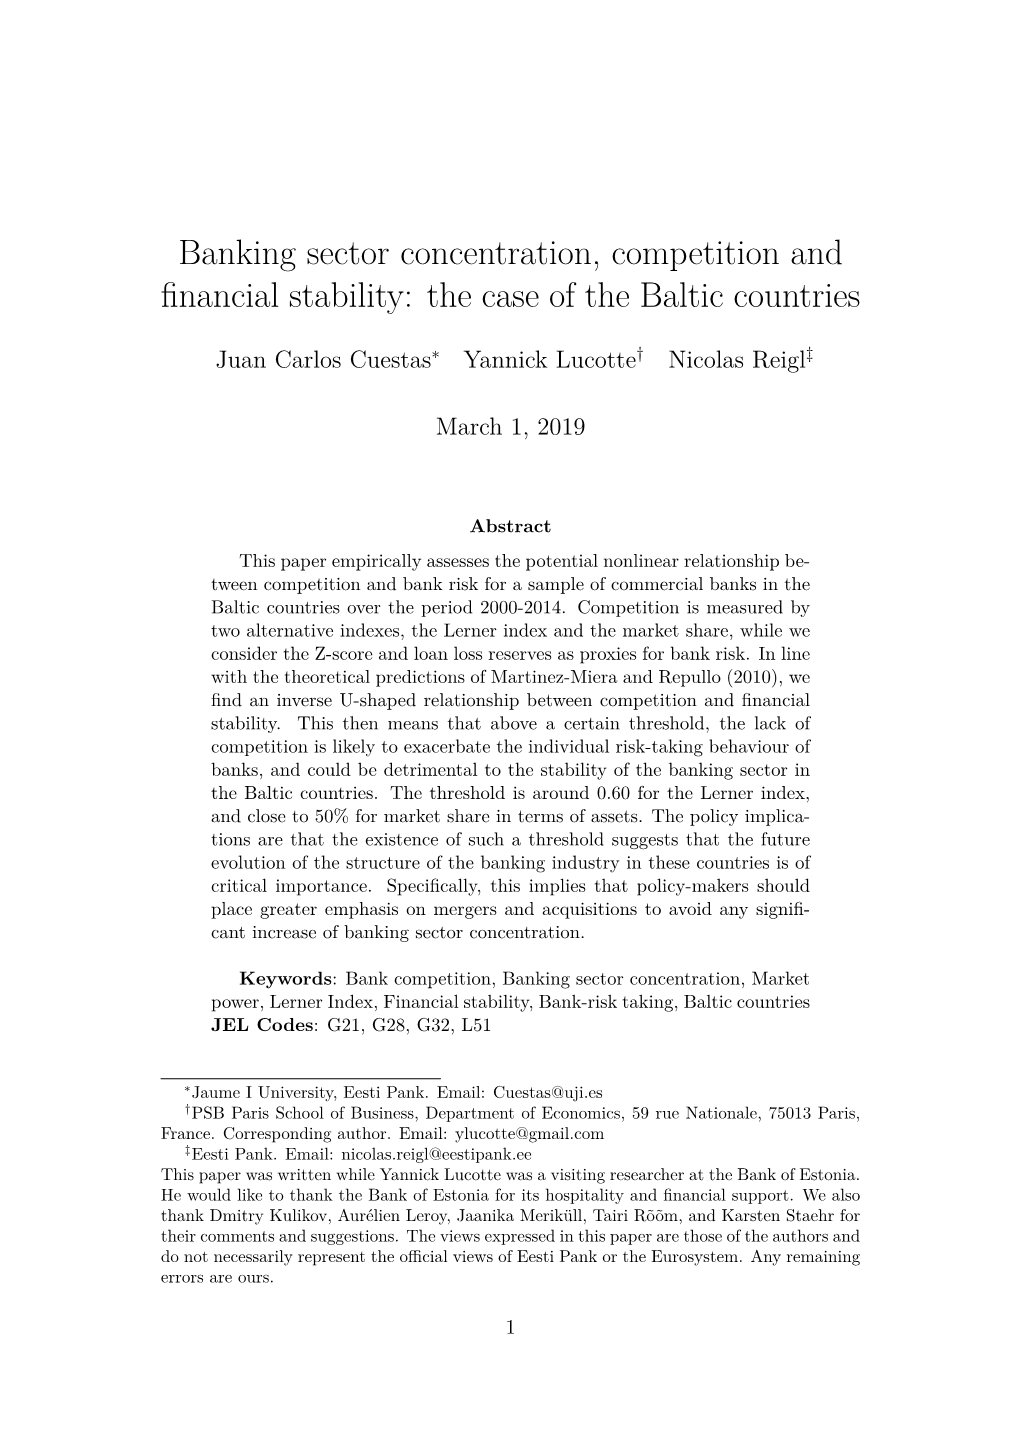 Banking Sector Concentration, Competition and Financial Stability